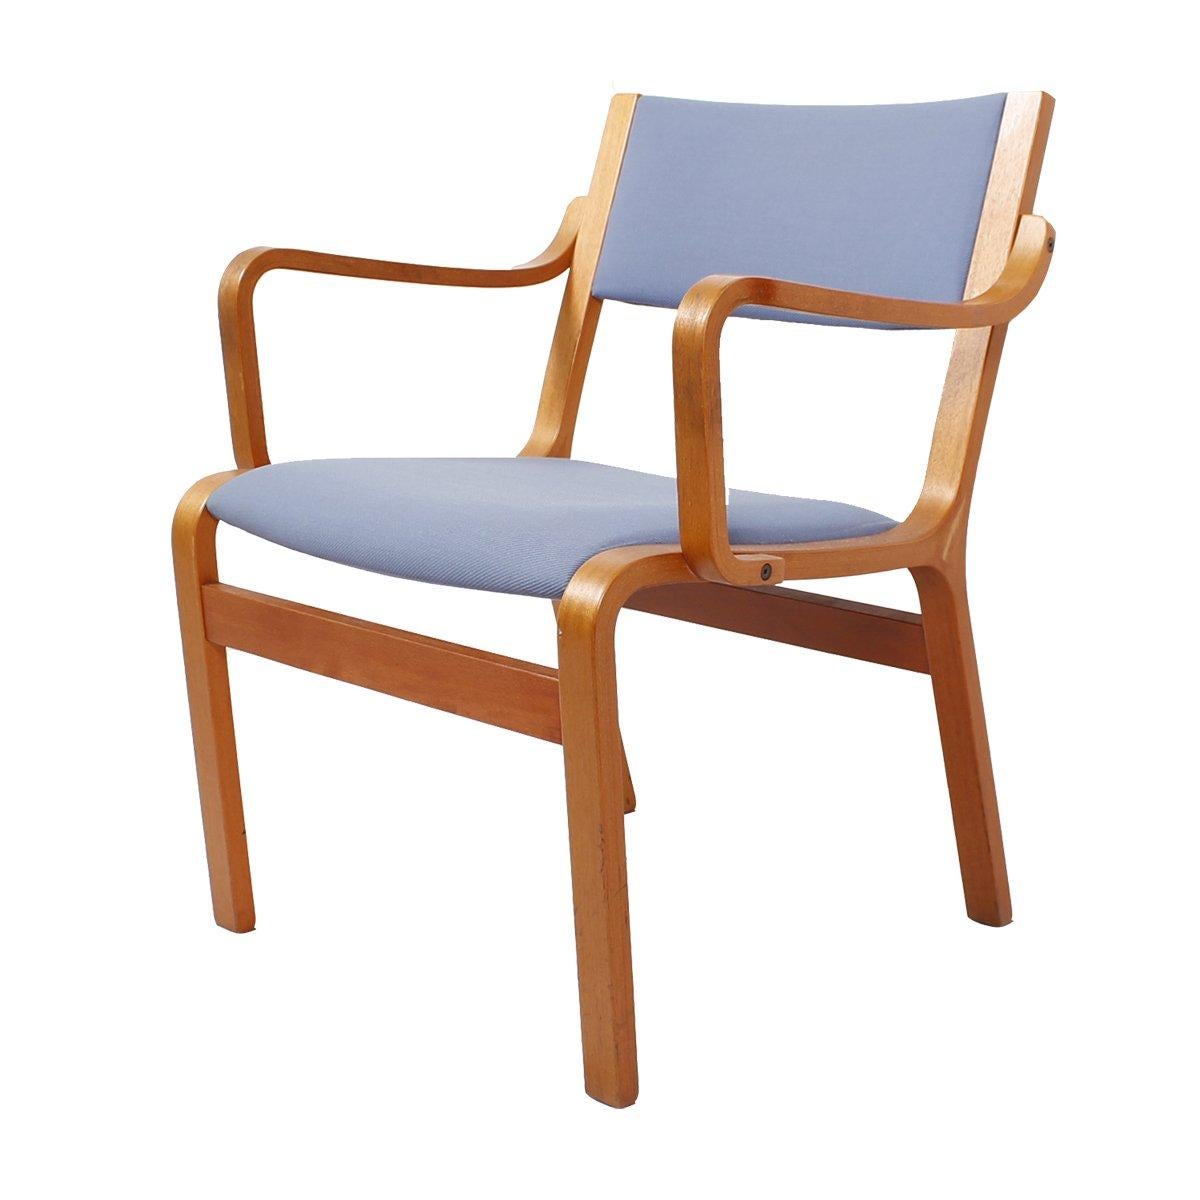 Pair of Bentwood Arm Chairs with Blue Upholstery from Danish Embassy
 
 Additional information:
 Material: Bentwood, Upholstery
 Here is a handsome pair of accent chairs with blond wood and blue upholstery. The arms and legs are bentwood, adding